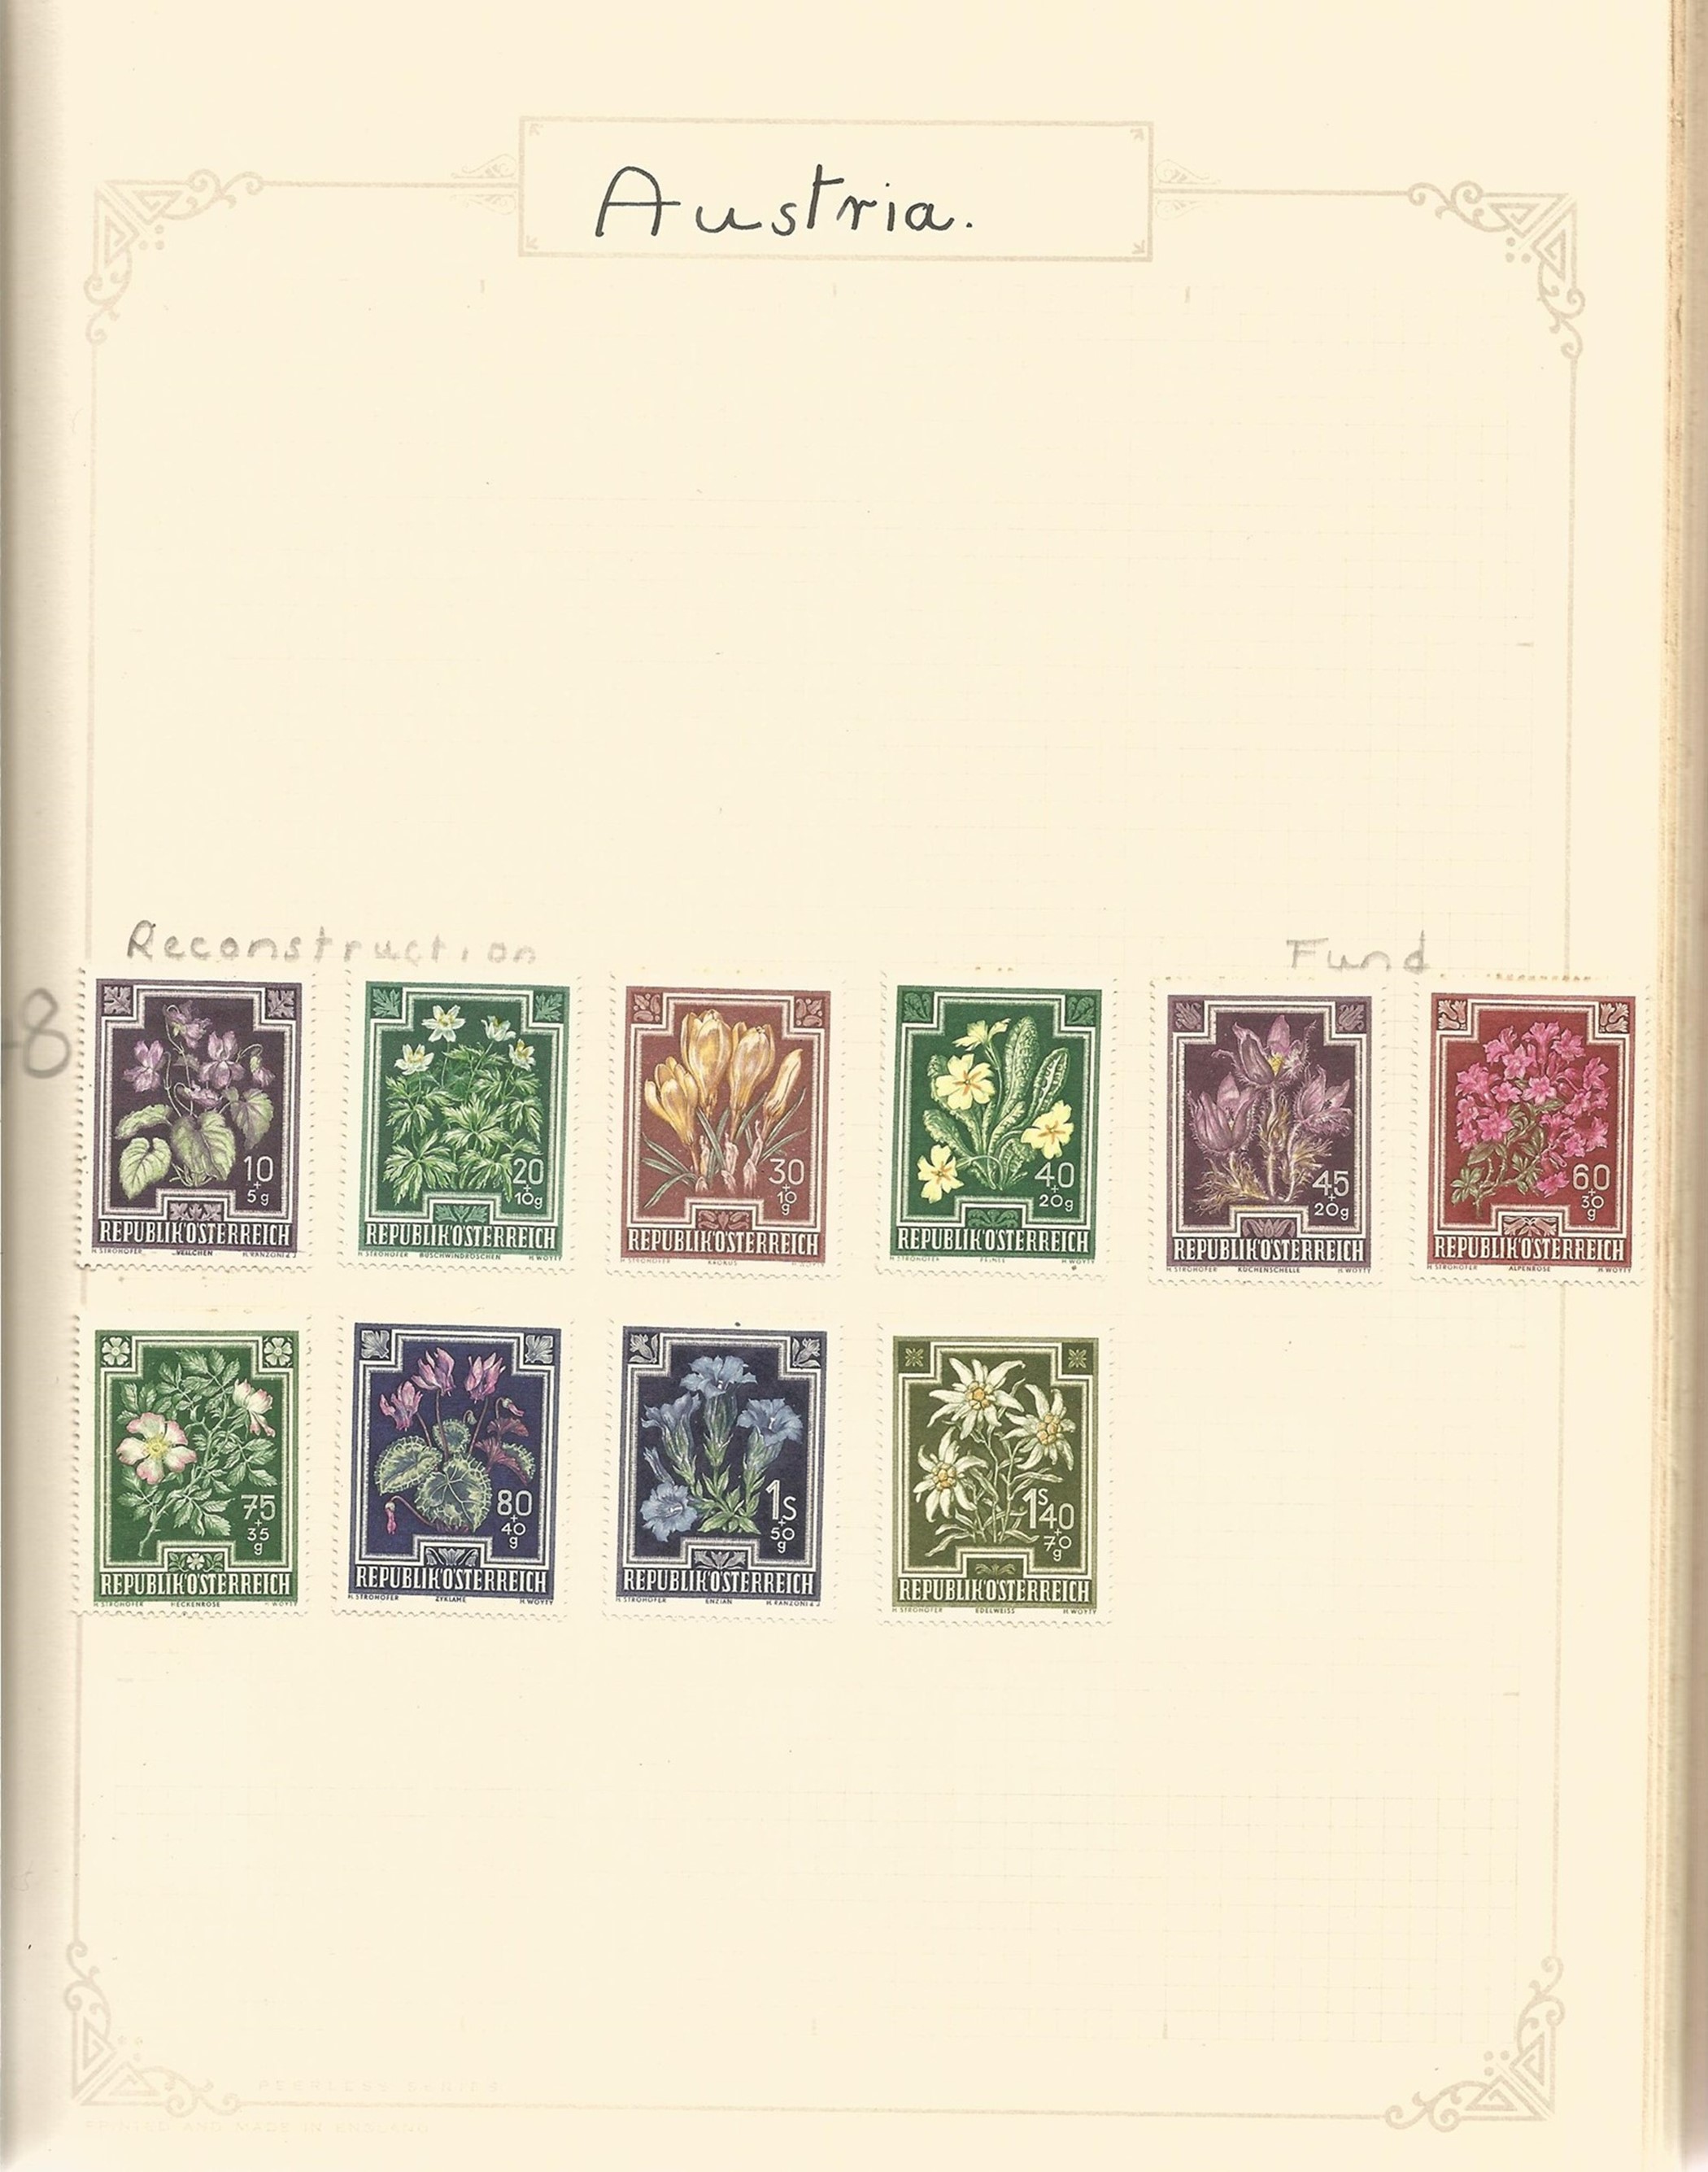 Austria (some Azores) mint & used in Album and Stockbook, Album has Stamps from 1850 to 1960s - Image 4 of 7